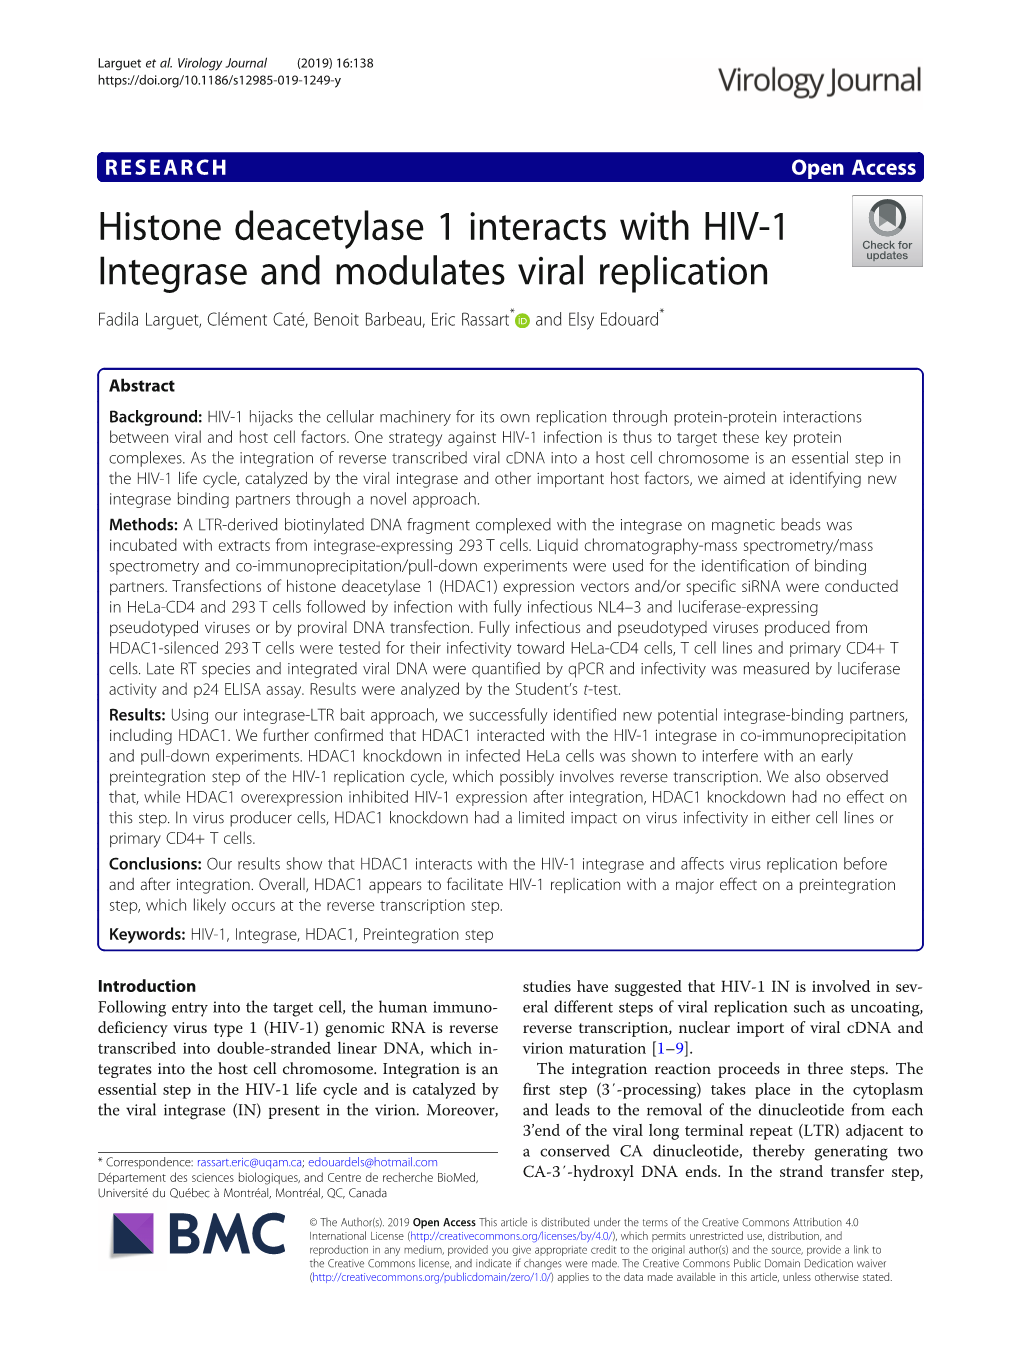 Histone Deacetylase 1 Interacts with HIV-1 Integrase and Modulates Viral Replication Fadila Larguet, Clément Caté, Benoit Barbeau, Eric Rassart* and Elsy Edouard*